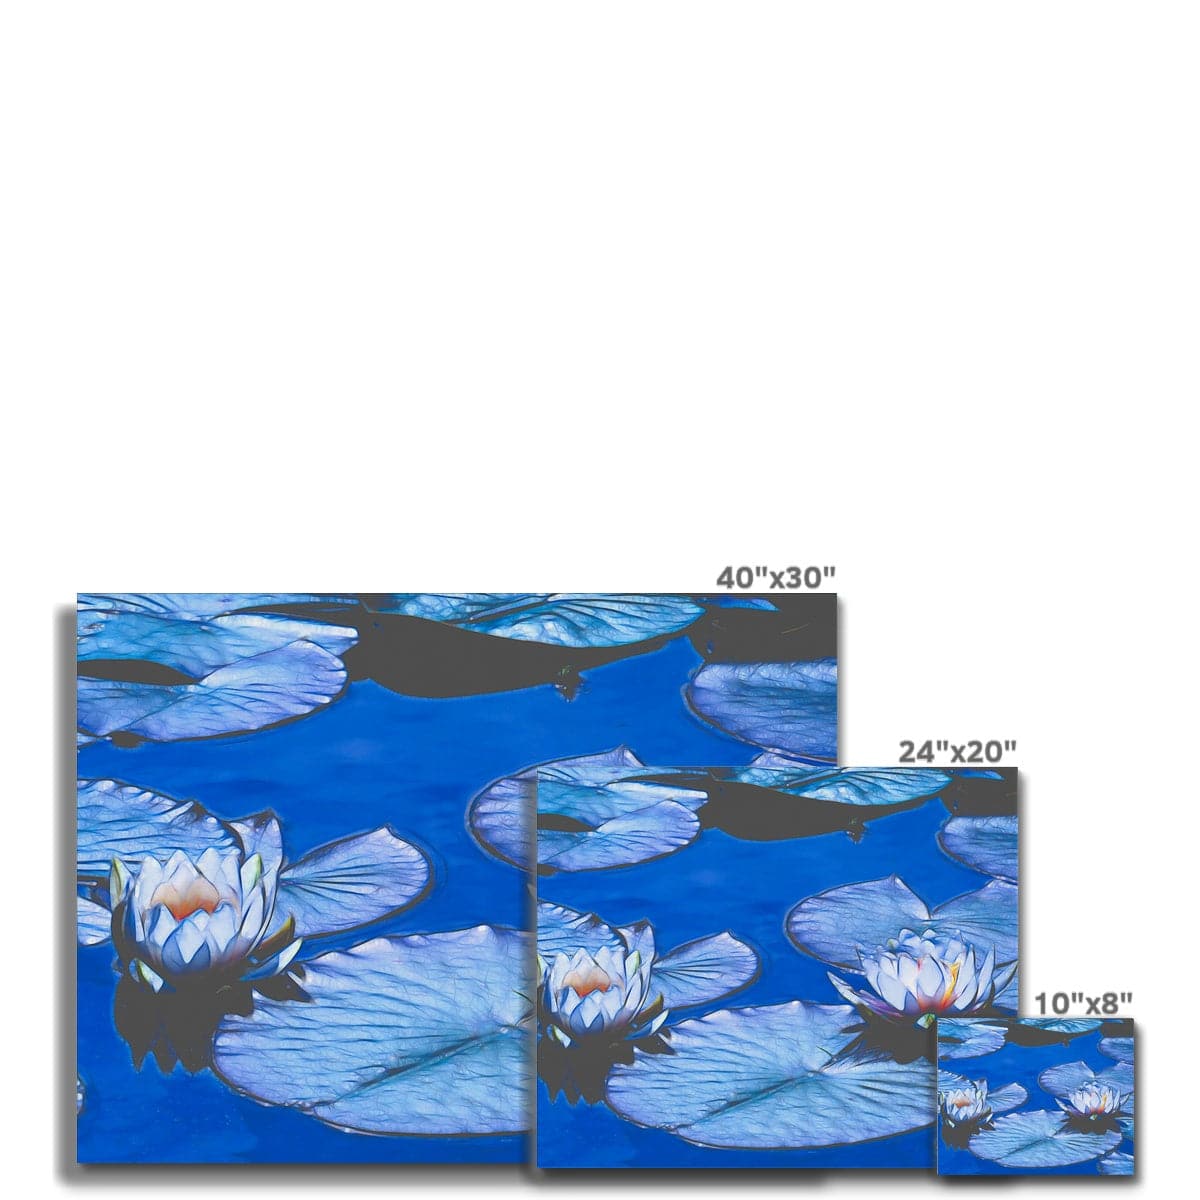 Blue waterlilies_1 by Mother Nature Art, Canvas